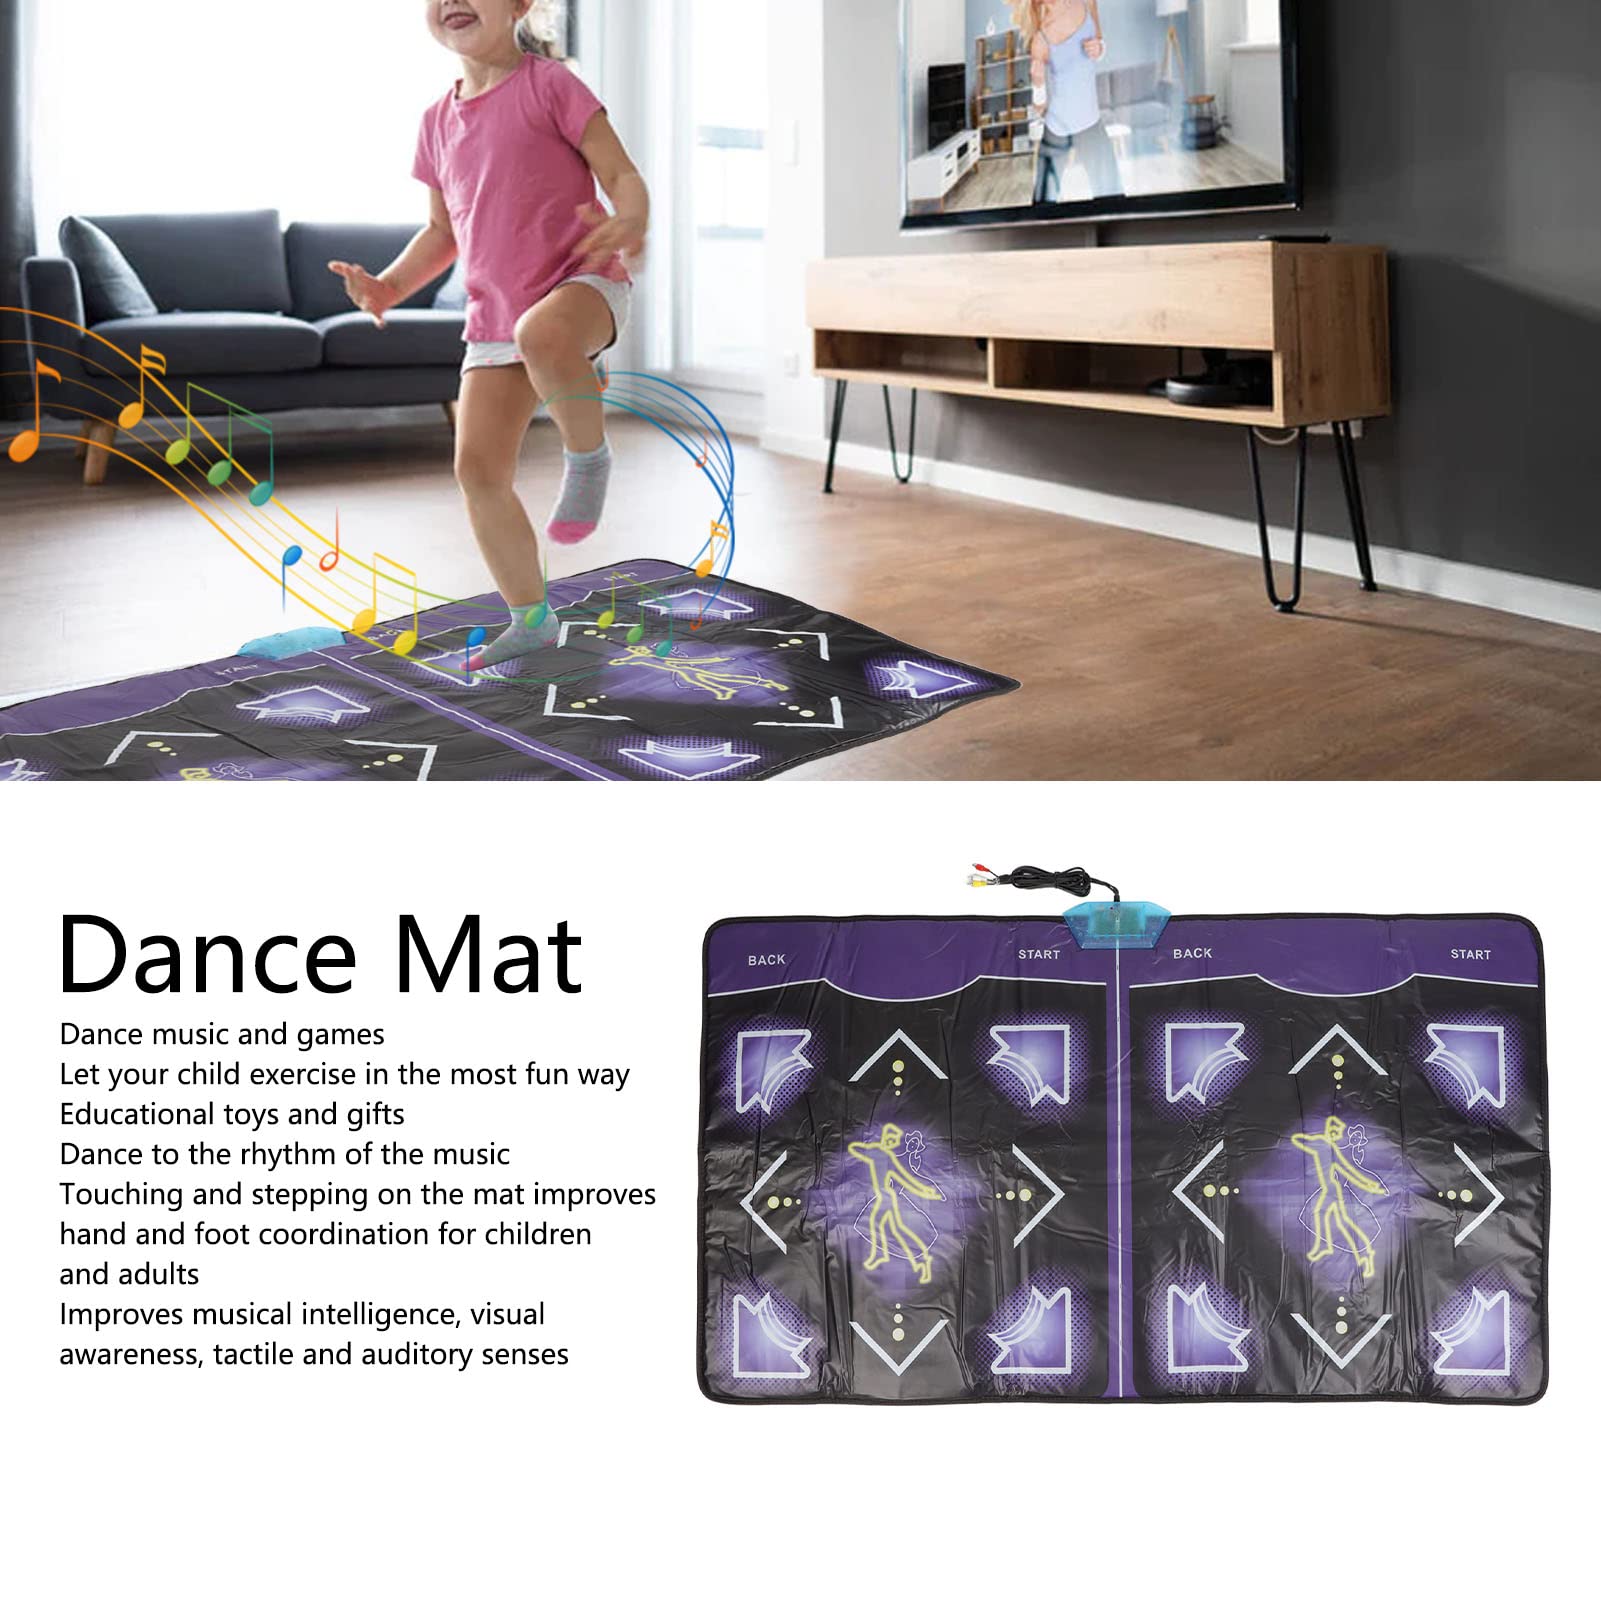 plplaaoo Dance Mat, Double Dance Mat, Electronic Dance Mat, Dance Mat Adult and Children's Double Dance Floor Mat with Handle Support Memory Card for Kids & Adults, Gift for Boys & Girls 100‑240V